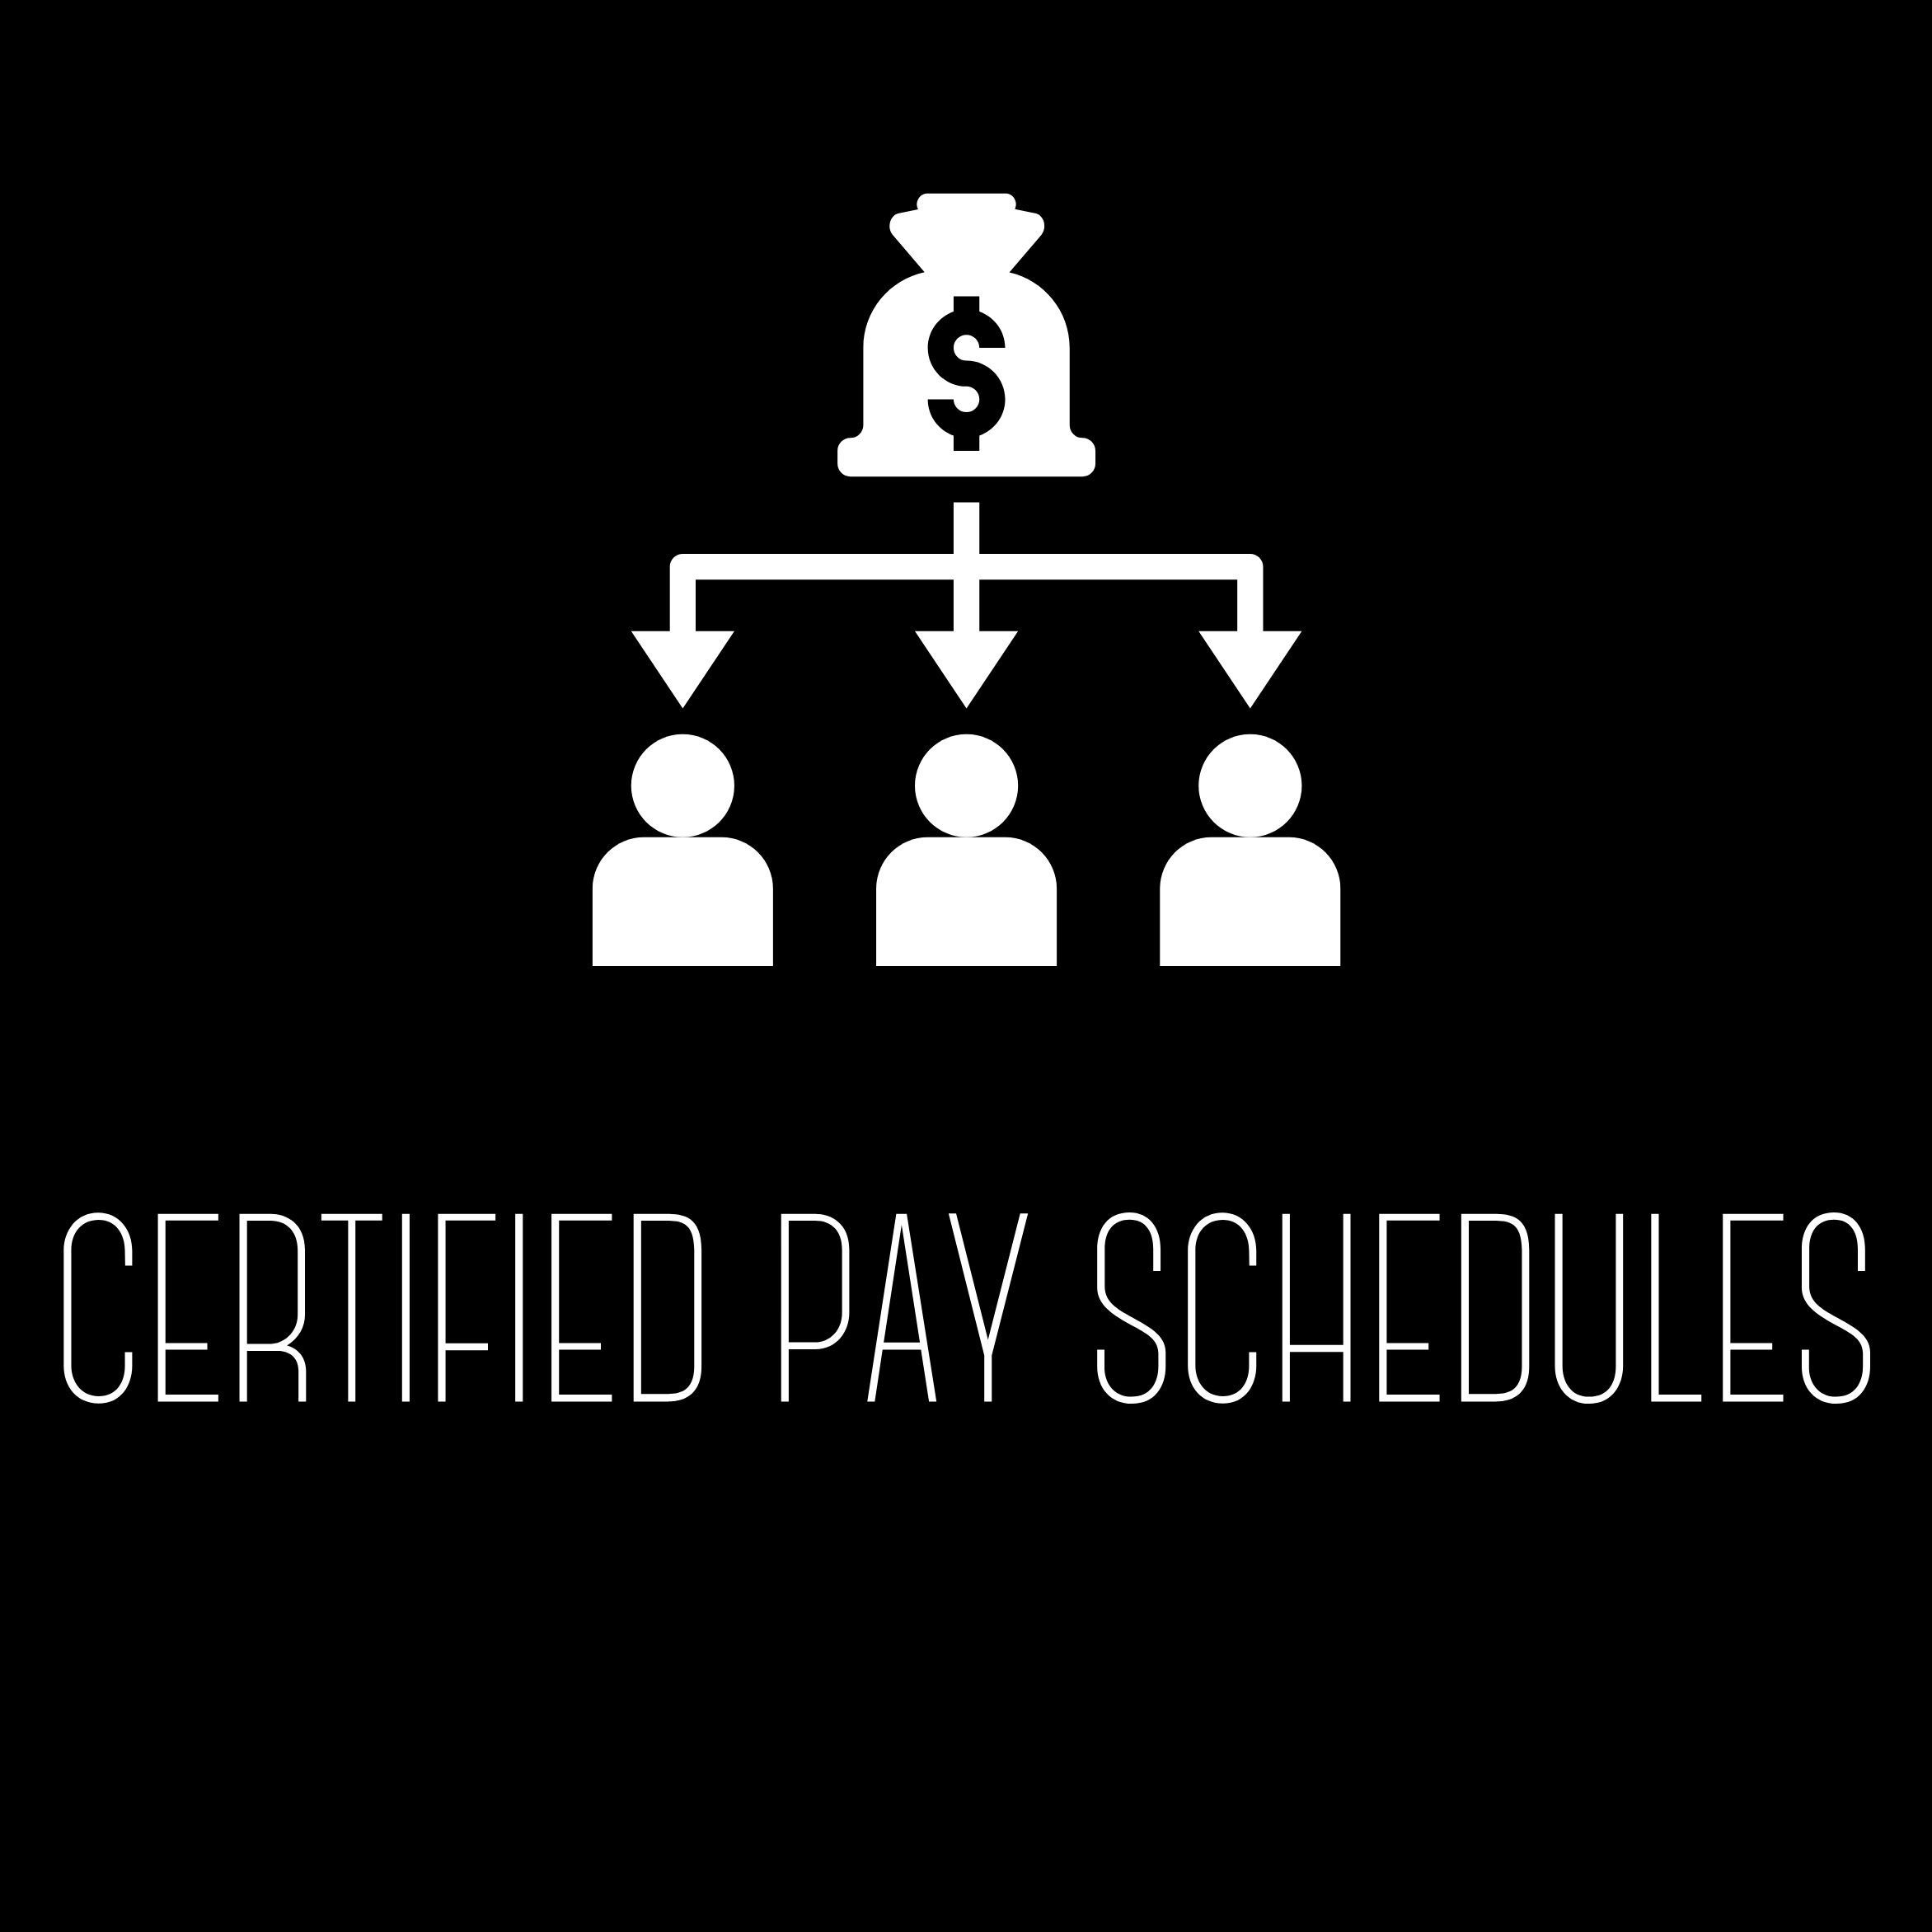 Certified Pay Schedules